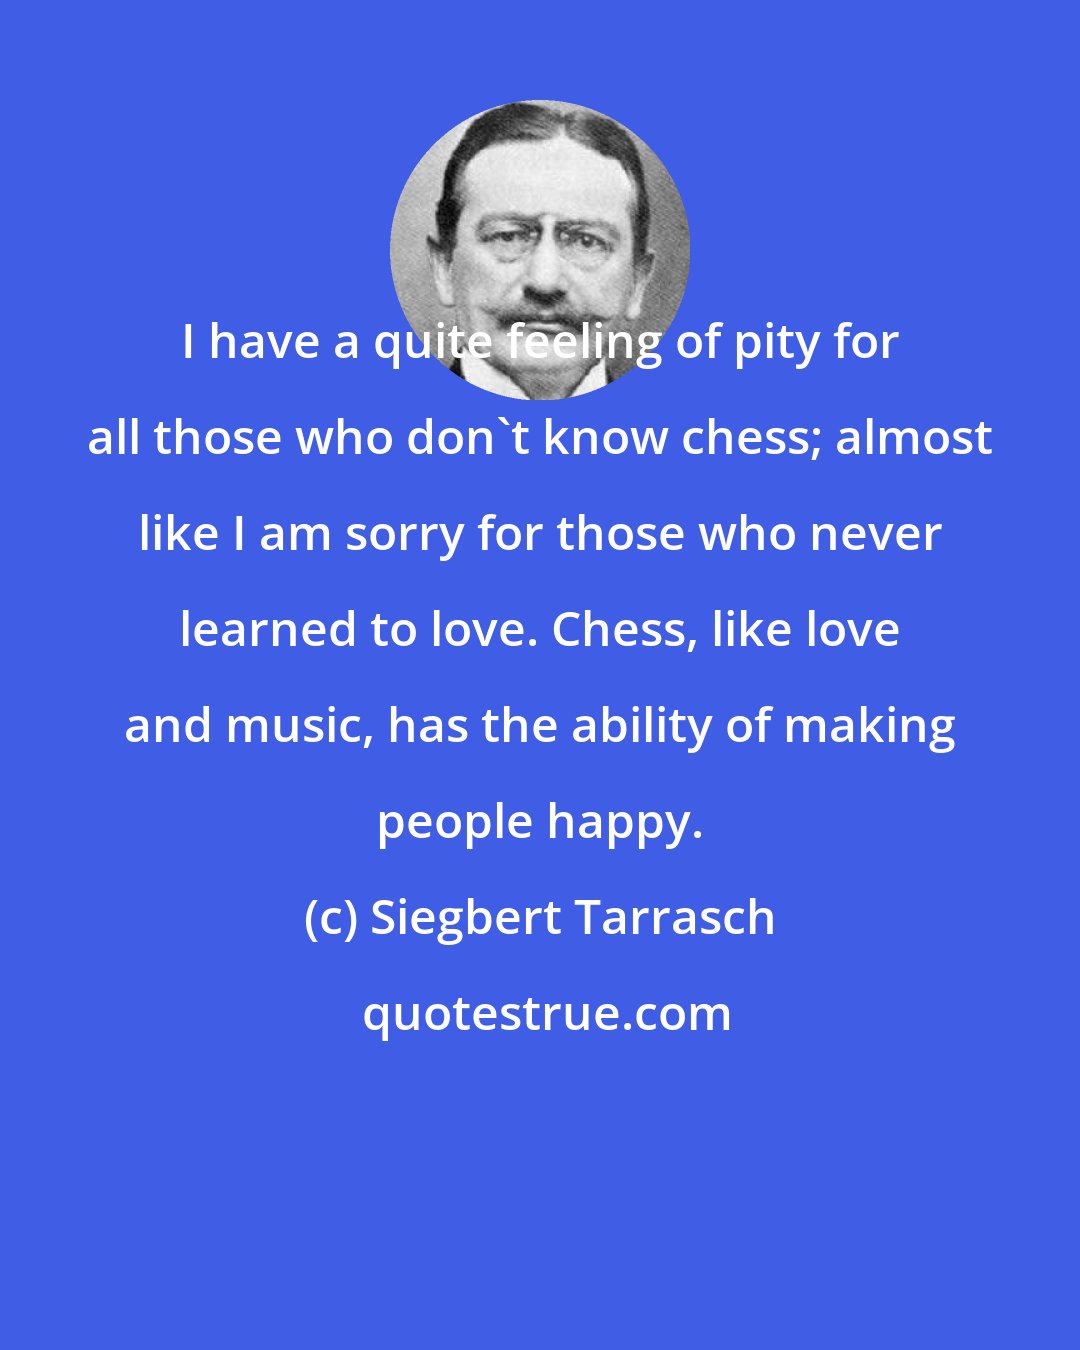 Siegbert Tarrasch: I have a quite feeling of pity for all those who don't know chess; almost like I am sorry for those who never learned to love. Chess, like love and music, has the ability of making people happy.